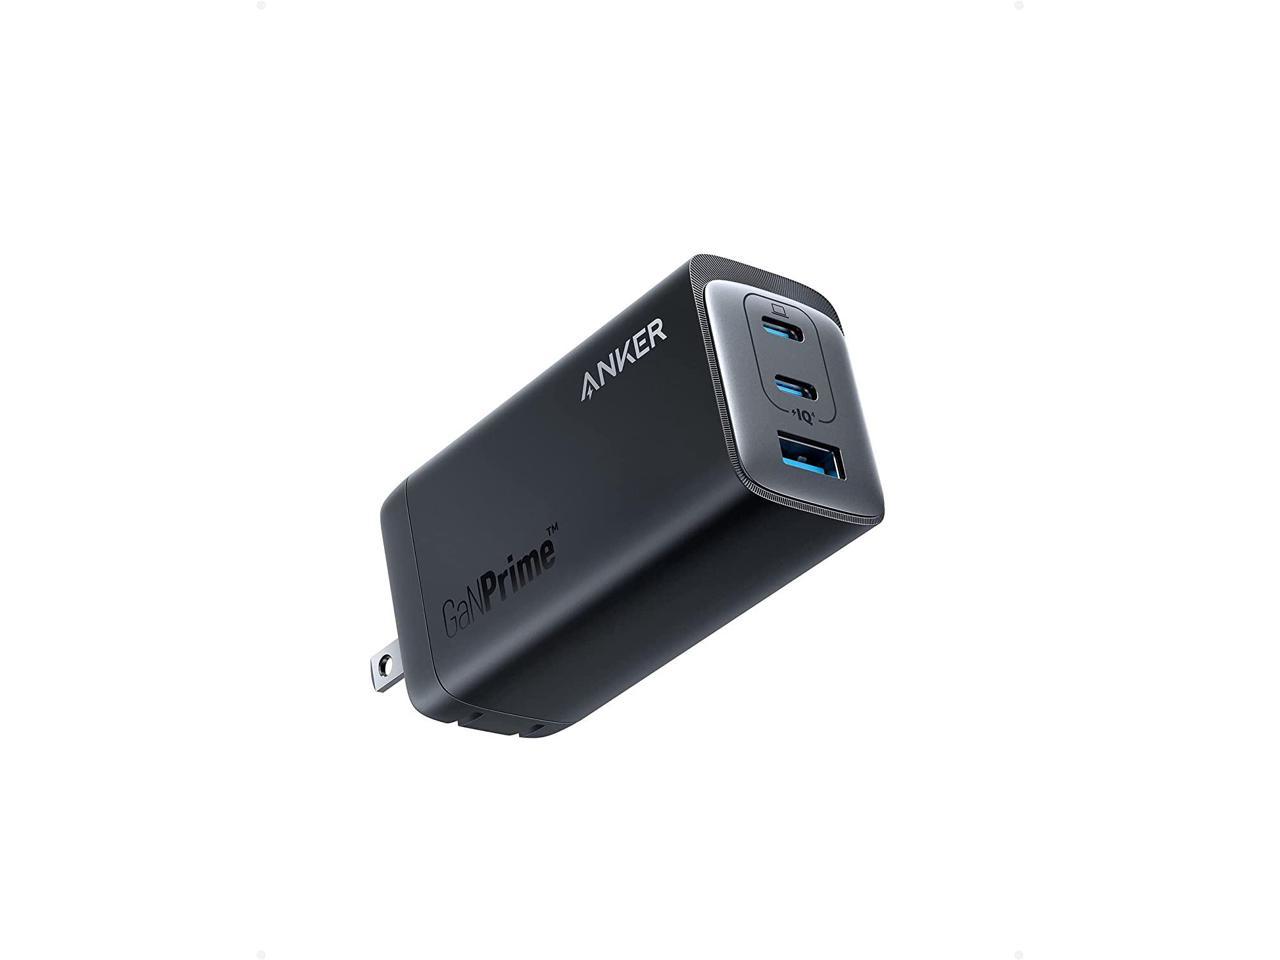 Anker 737 GaNPrime USB C Wall Charger 120W GaNPrime PPS 3-Port Fast Compact Foldable $66.49